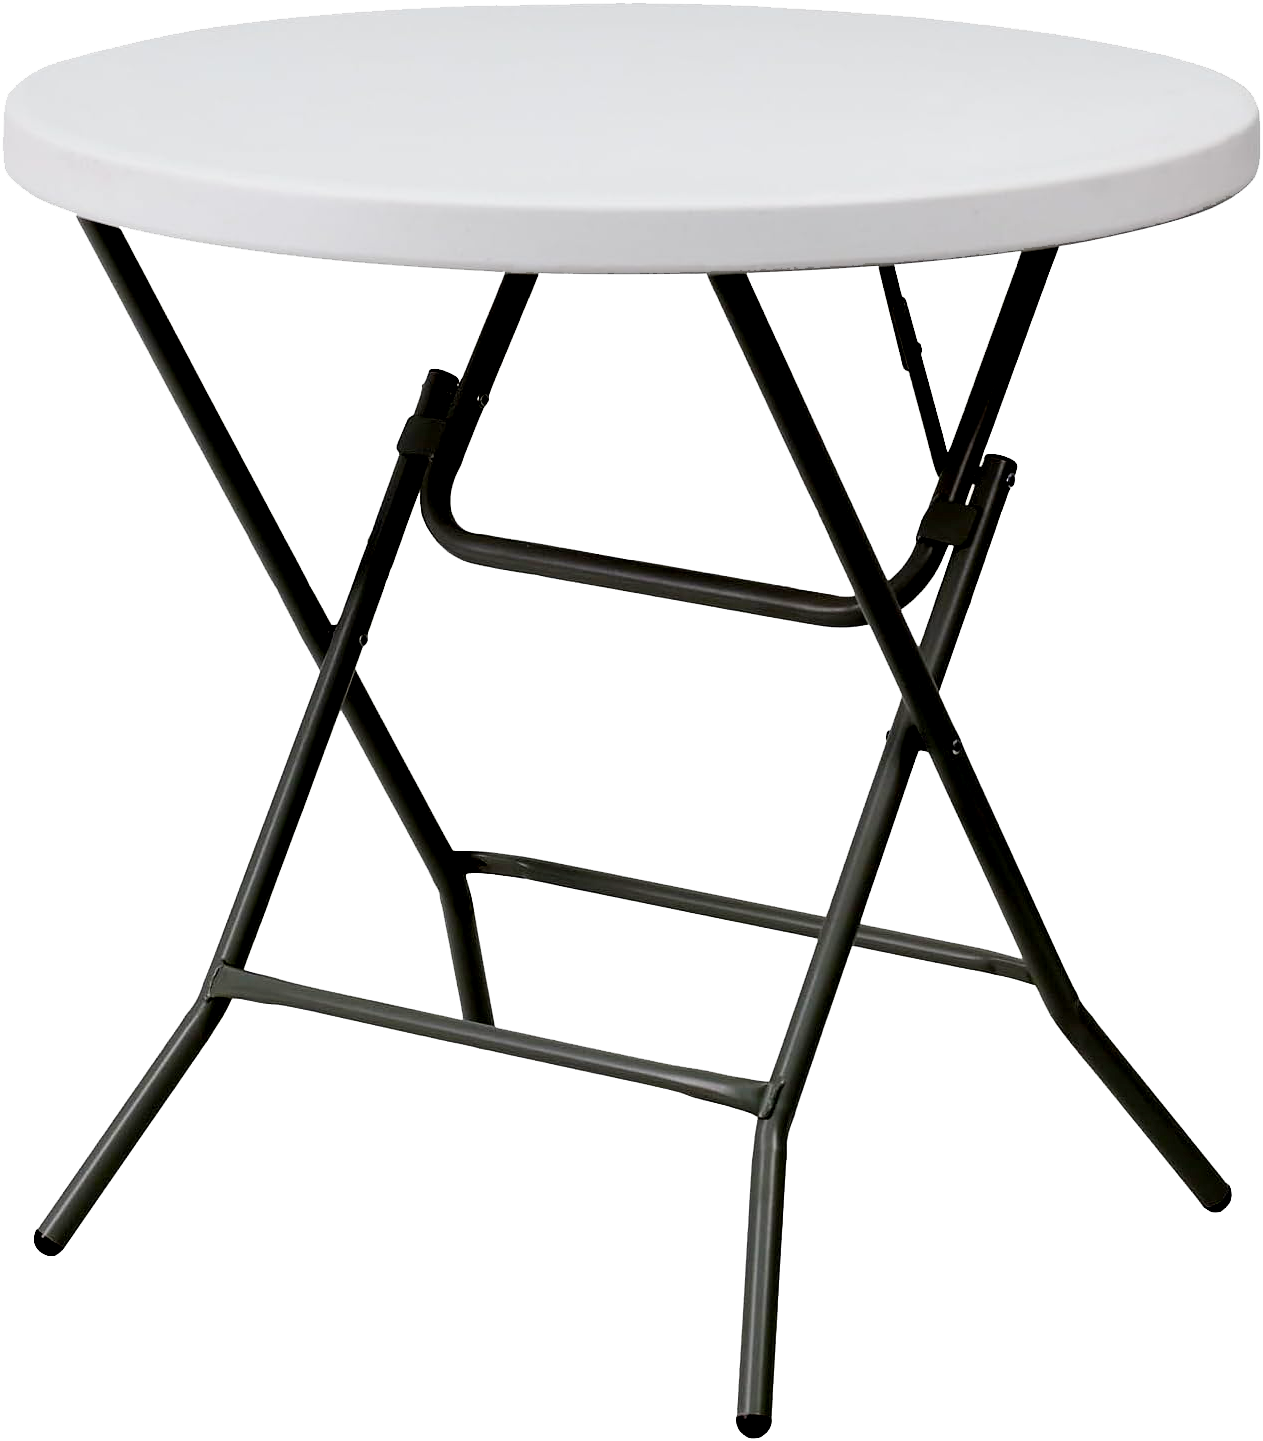 80cm HDPE Round Folding Table with Black Legs (White)